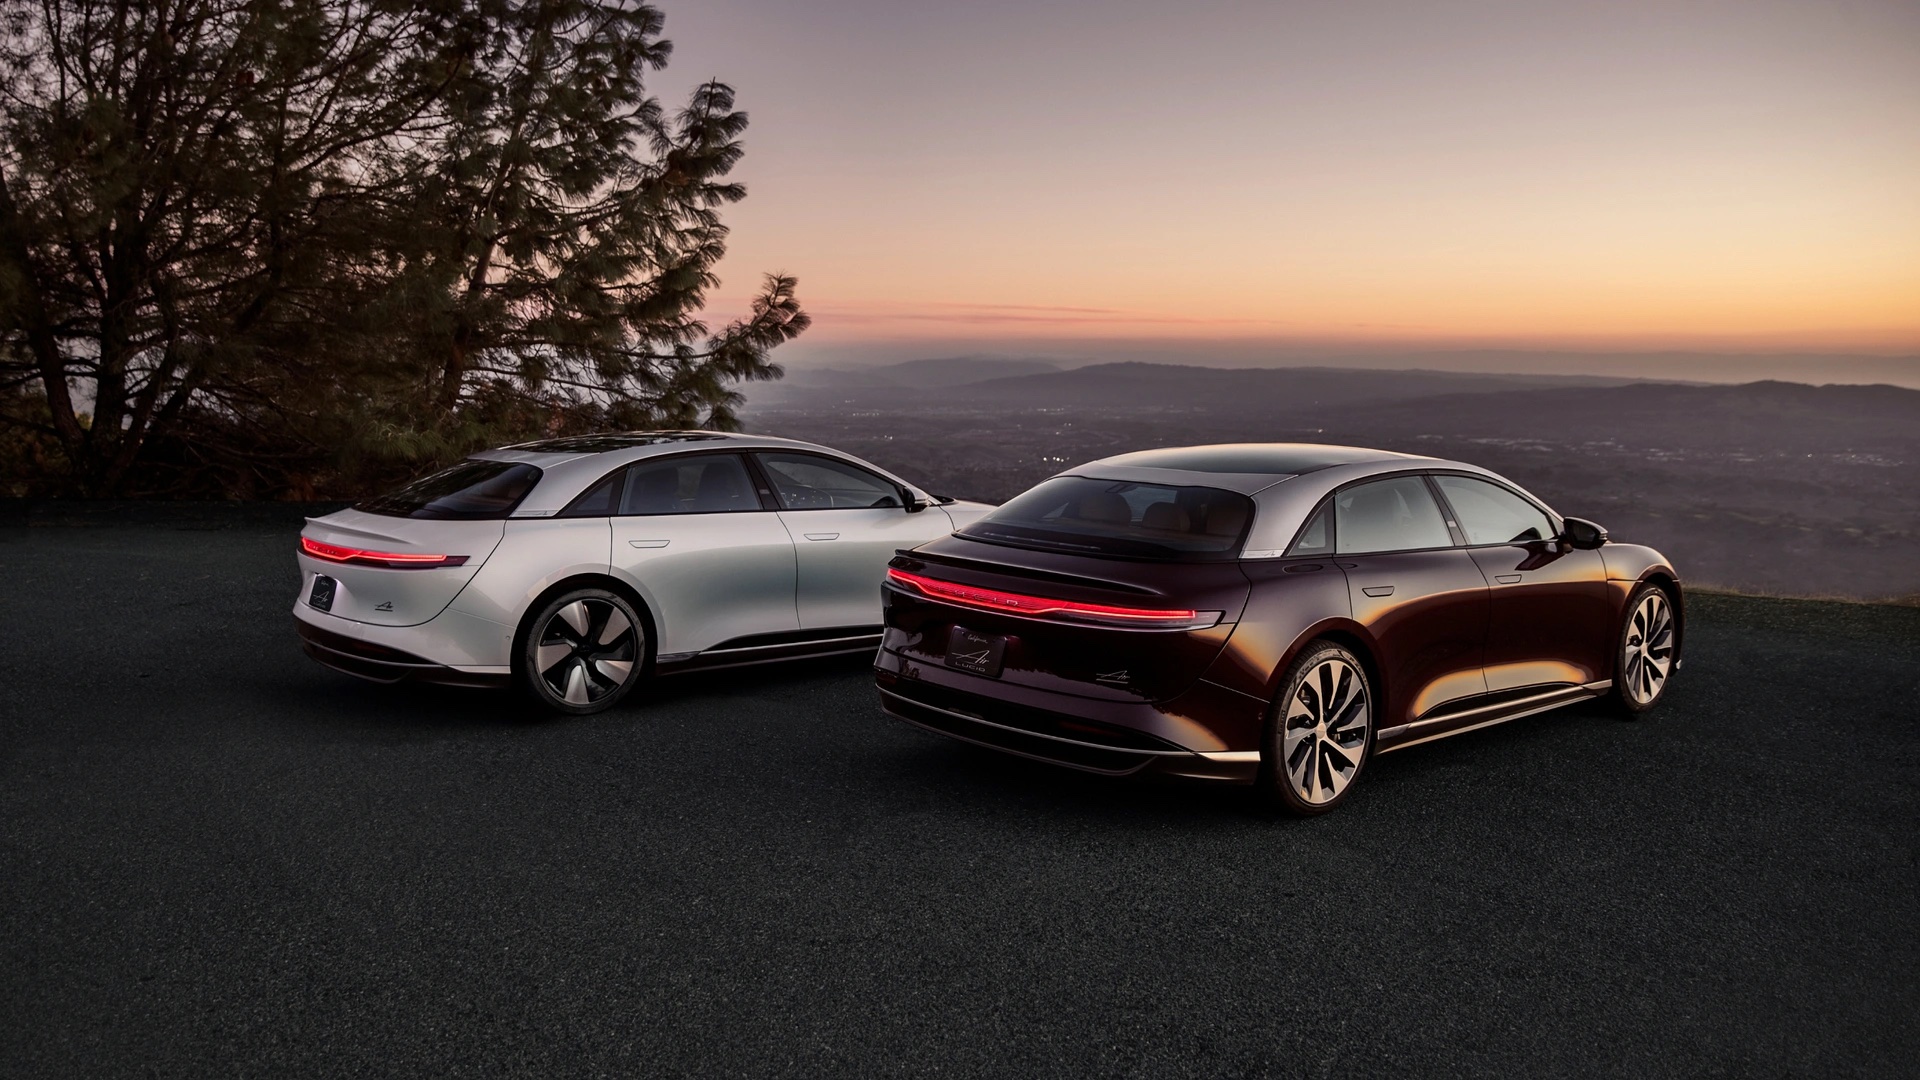 Lucid Motors Officially Launches Grand Touring Performance Model